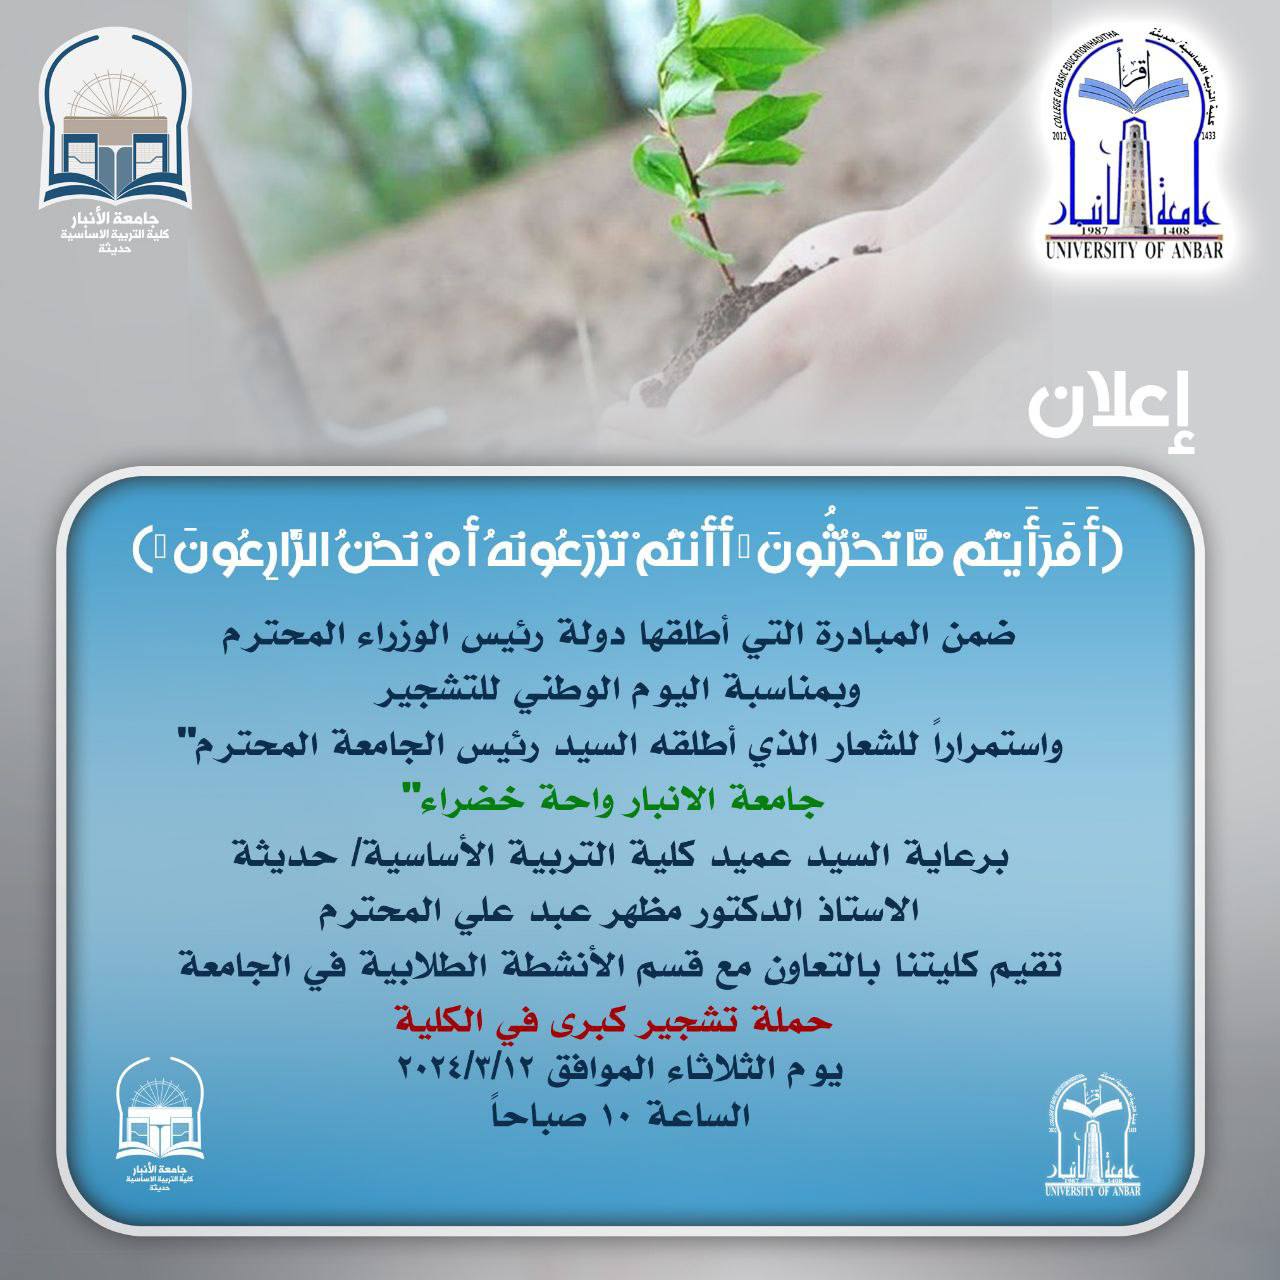 In support of the national initiative, the College of Basic/Haditha Education organizes a tree planting campaign.